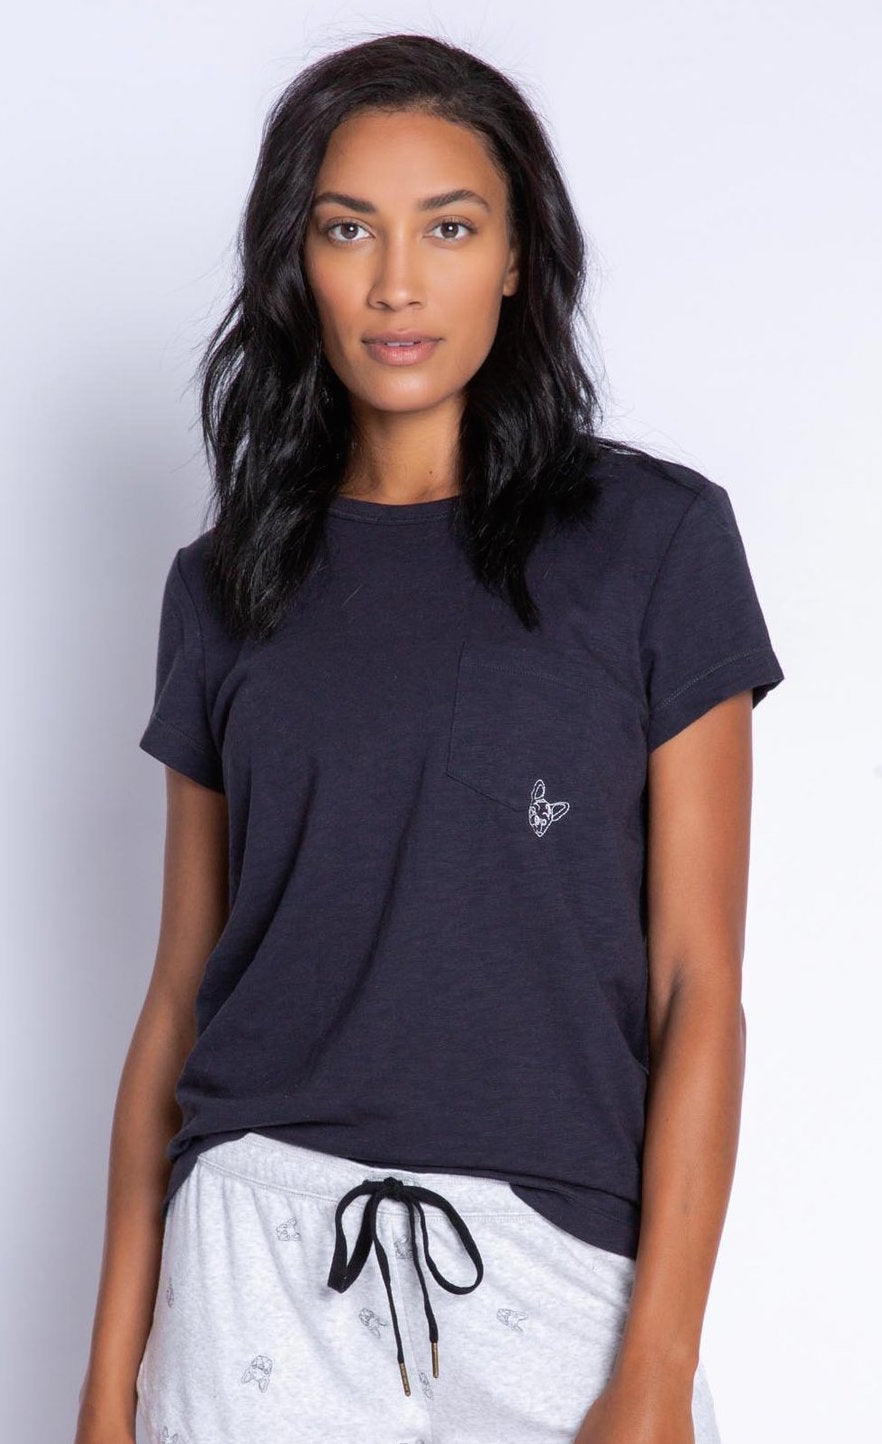 Front top half view of a woman wearing the PJ Salvage Lily Rose Tee. The short sleeve t-shirt is black and has a single front pocket on the left side with a tiny french bulldog face printed on it.